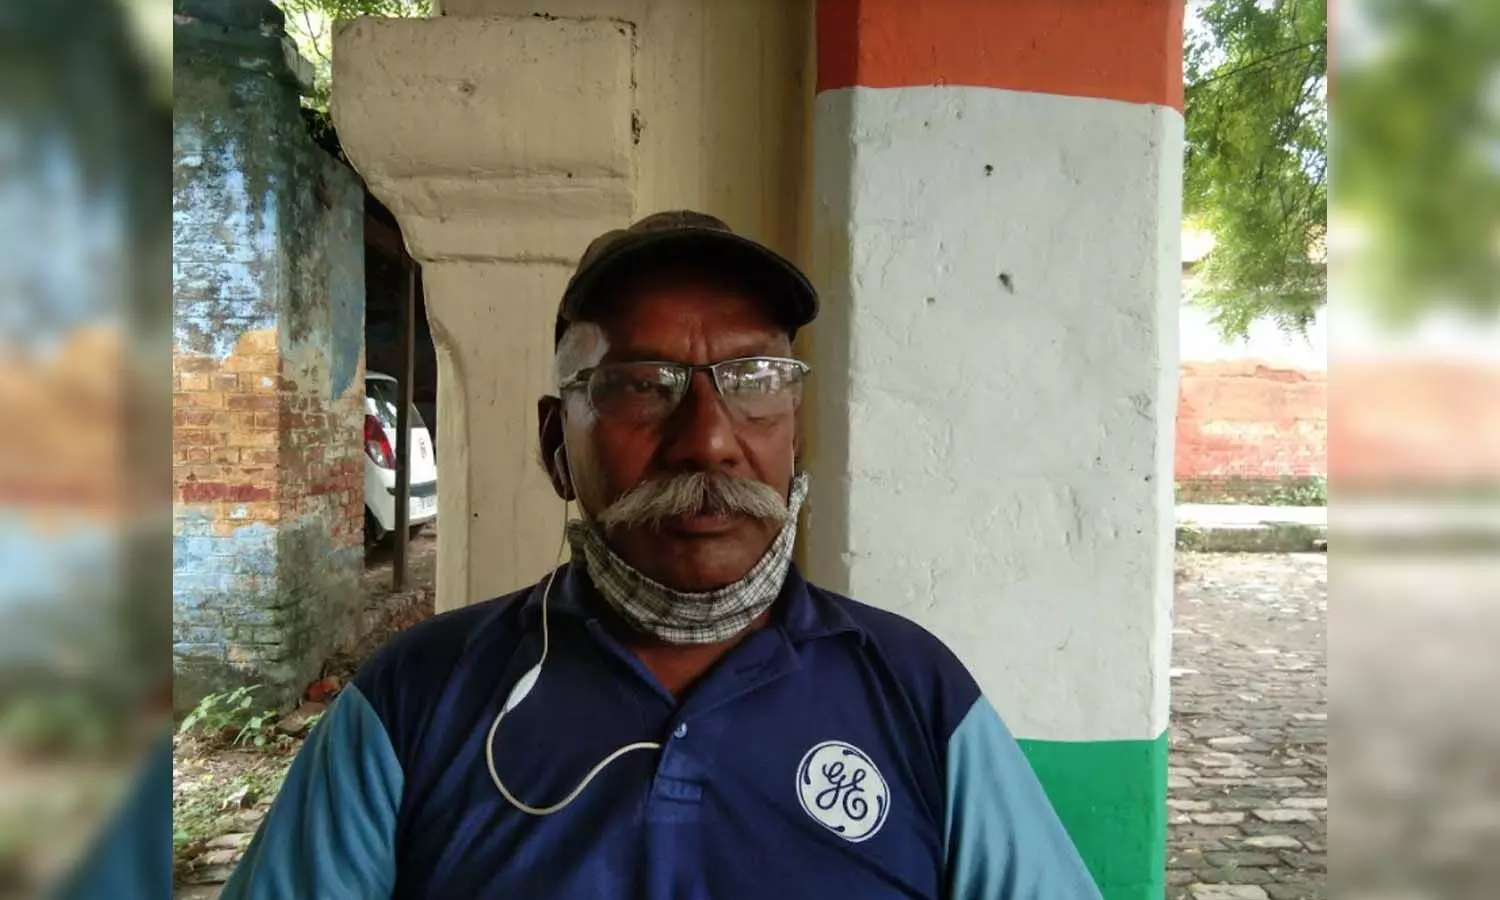 Madan Kumar Singh, a resident of Rae Bareli, got an opportunity to serve the country in the Kargil War while working for the Army Postal Service, which is an indelible mark of his life.